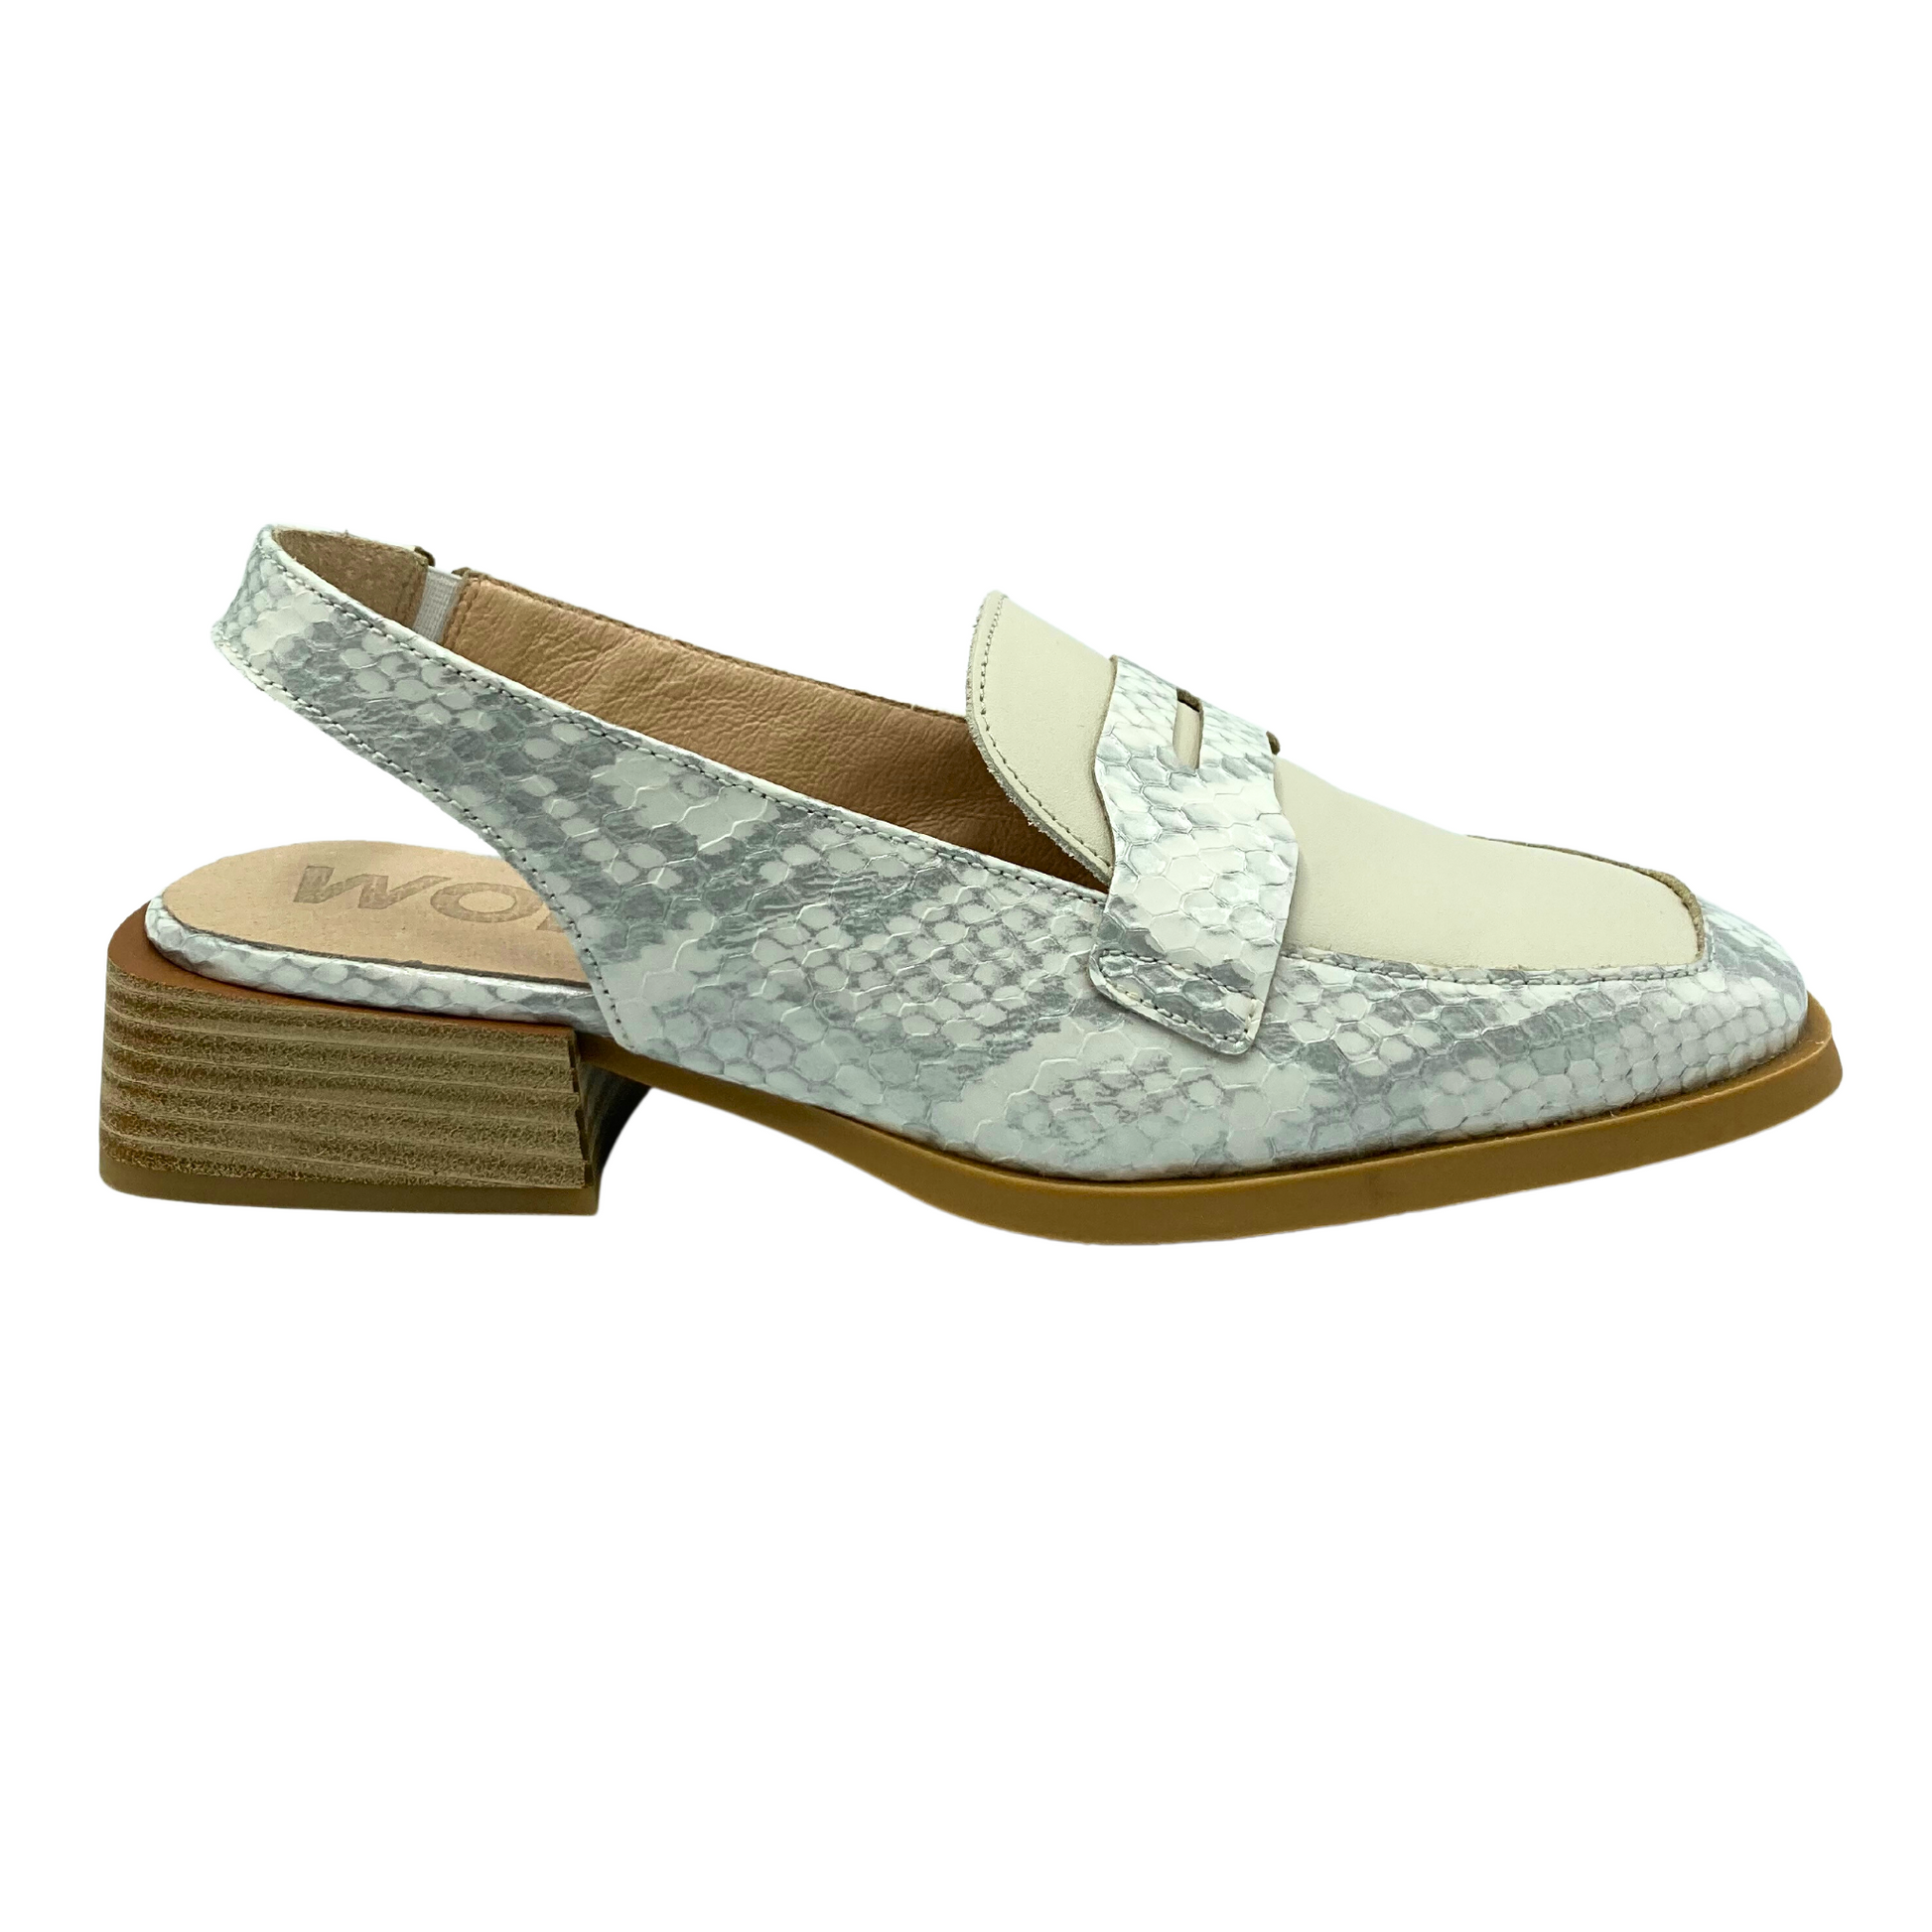 Outside view of a slingback loafer.  Upper is a faux snake in grey white with a taupe panel down front.